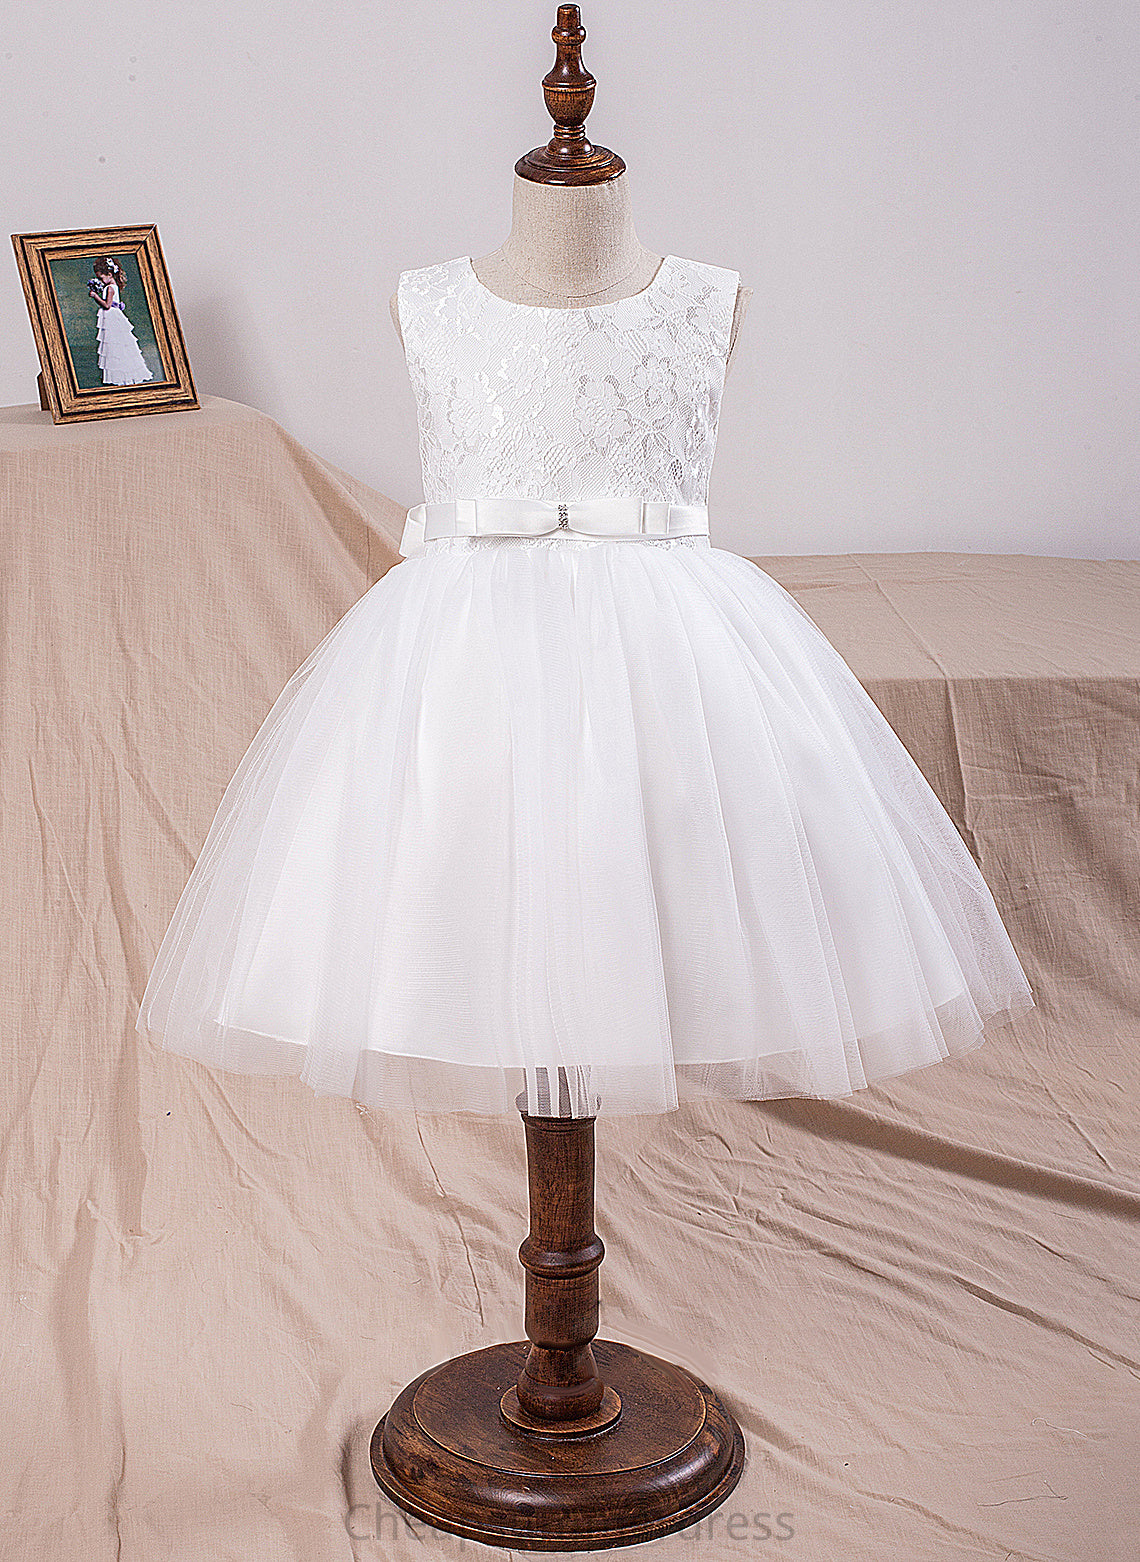 - Girl Scoop Flower Ball-Gown/Princess Flower Girl Dresses Dress Neck Carolyn Sleeveless Tulle/Lace With Bow(s) Knee-length